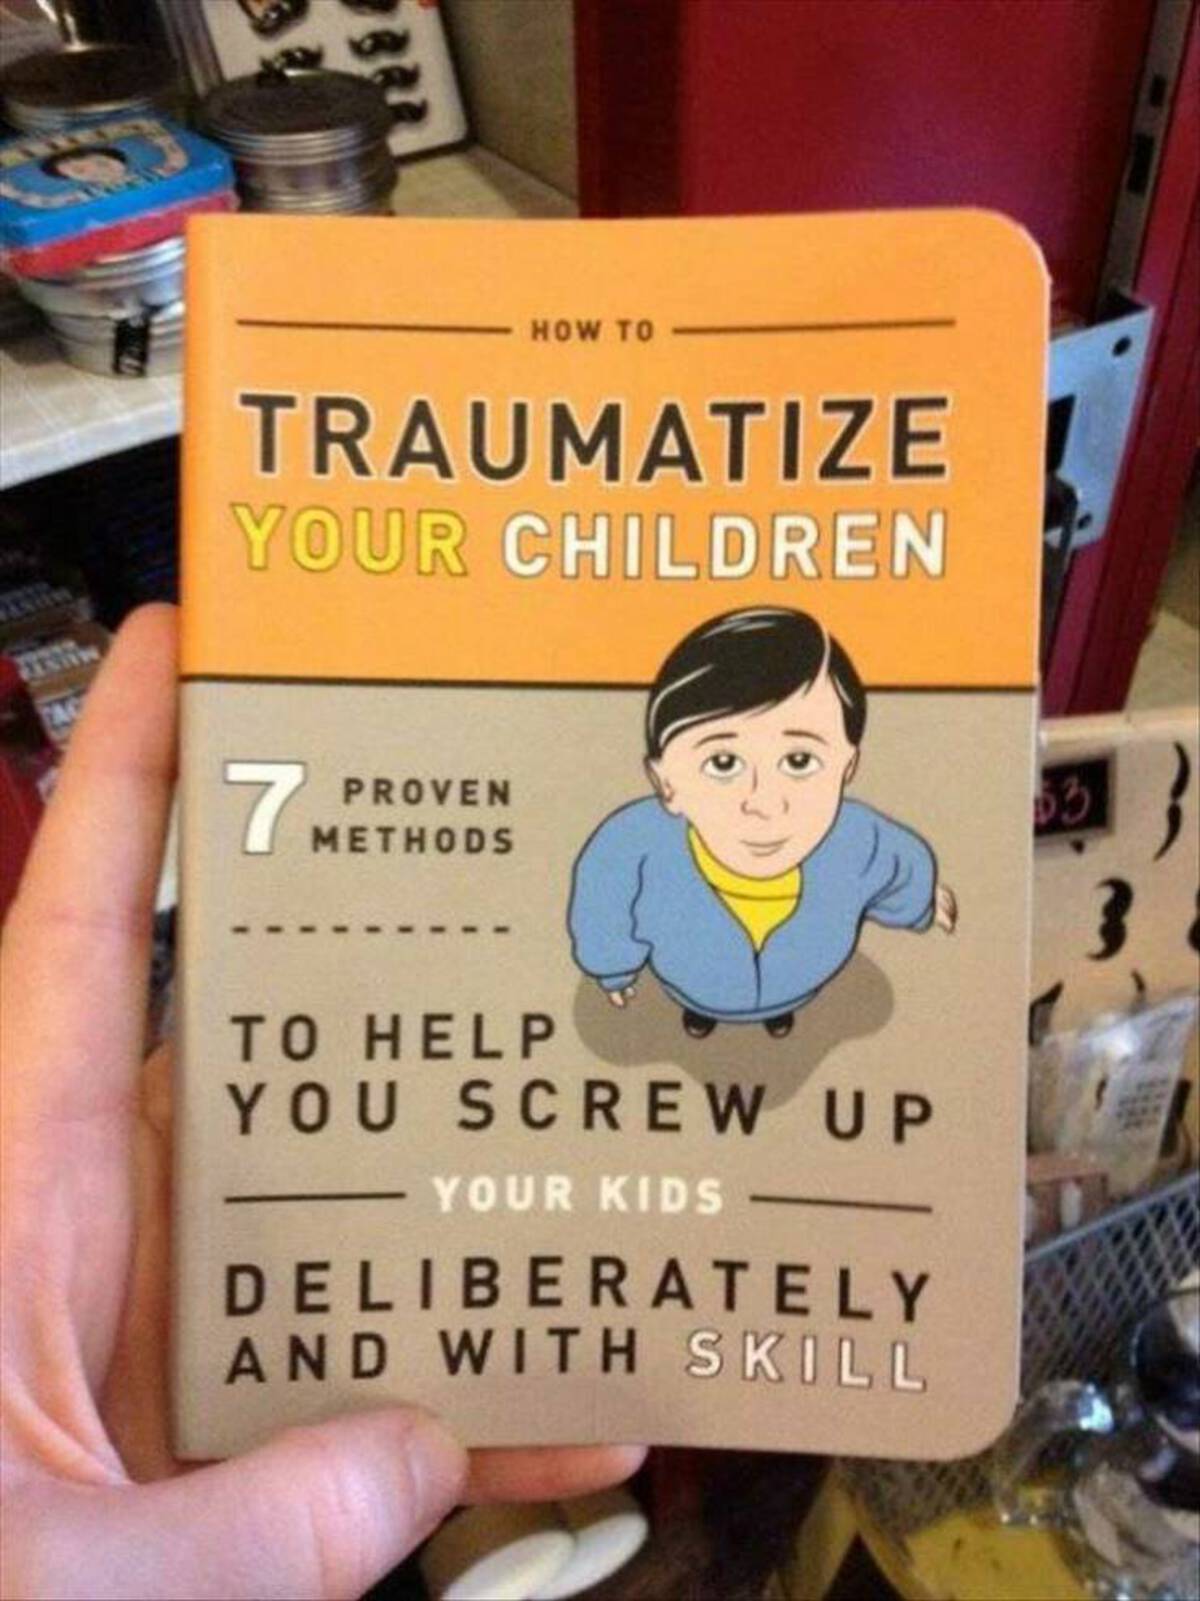 weird book titles - Traumatize Your Children 7 How To Proven Methods To Help You Screw Up Your Kids Deliberately And With Skill 3